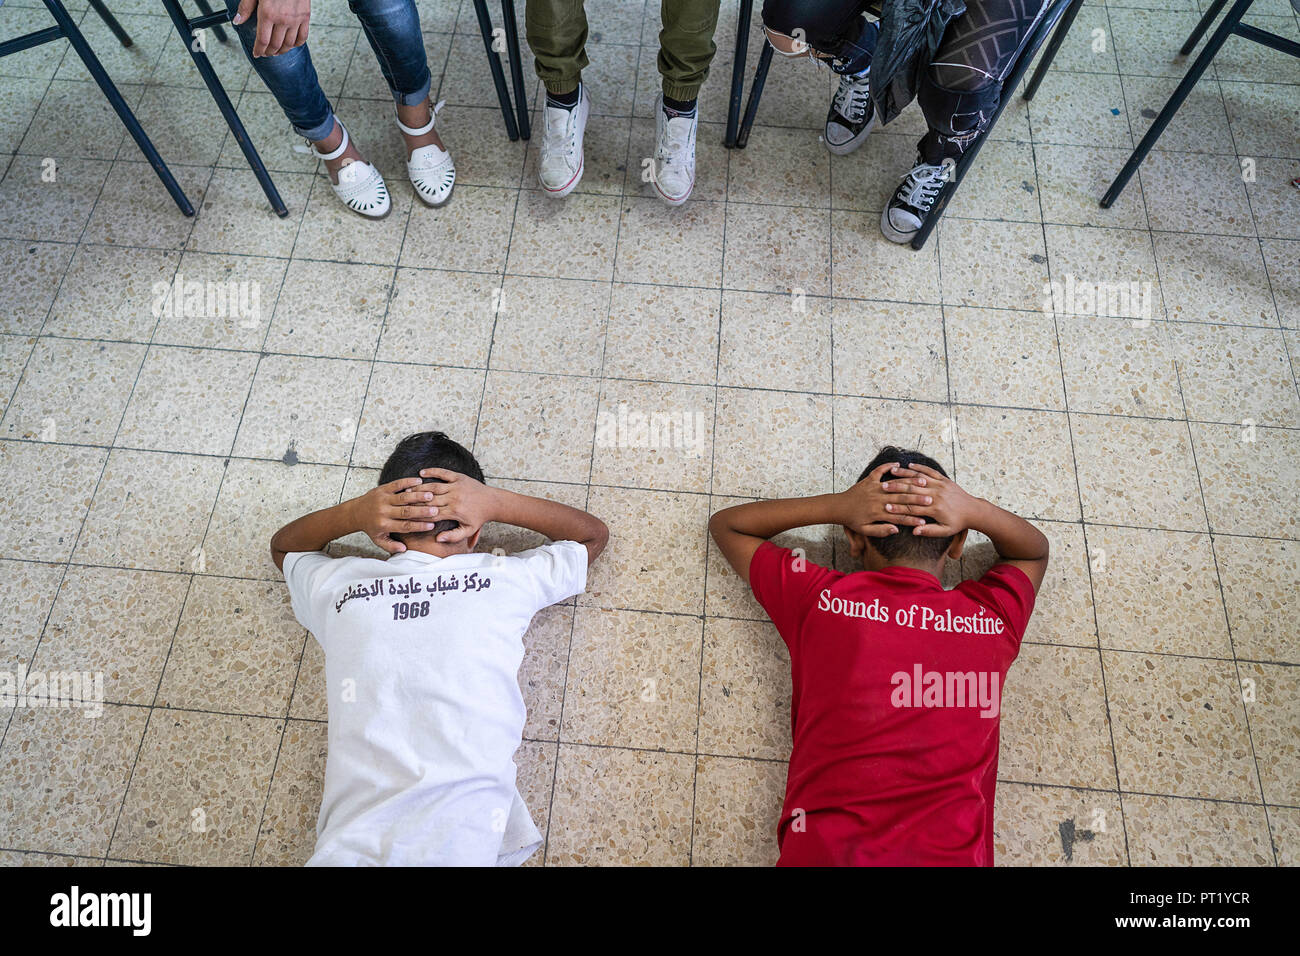 Bethlehem, Palestine. 14th Feb, 2018. Students are seen In a drama class re-acting a situation where Palestinian youths were arrested by the Israeli forces during the summer camp.The Return Summer Camp was organised for children of the Aida refugee camp, it was established in 1950 by the Palestinians who were expelled from their homes from 27 towns throughout Palestine, namely Nasra, Tabaria, Jerusalem, Acre, Jaffa, Haifa and Hebron. This is a 4th generation of refugees, 130 children ranging from 4 to 16 years of age being overlooked by 20 instructors and volunteers and it was funded by Stock Photo